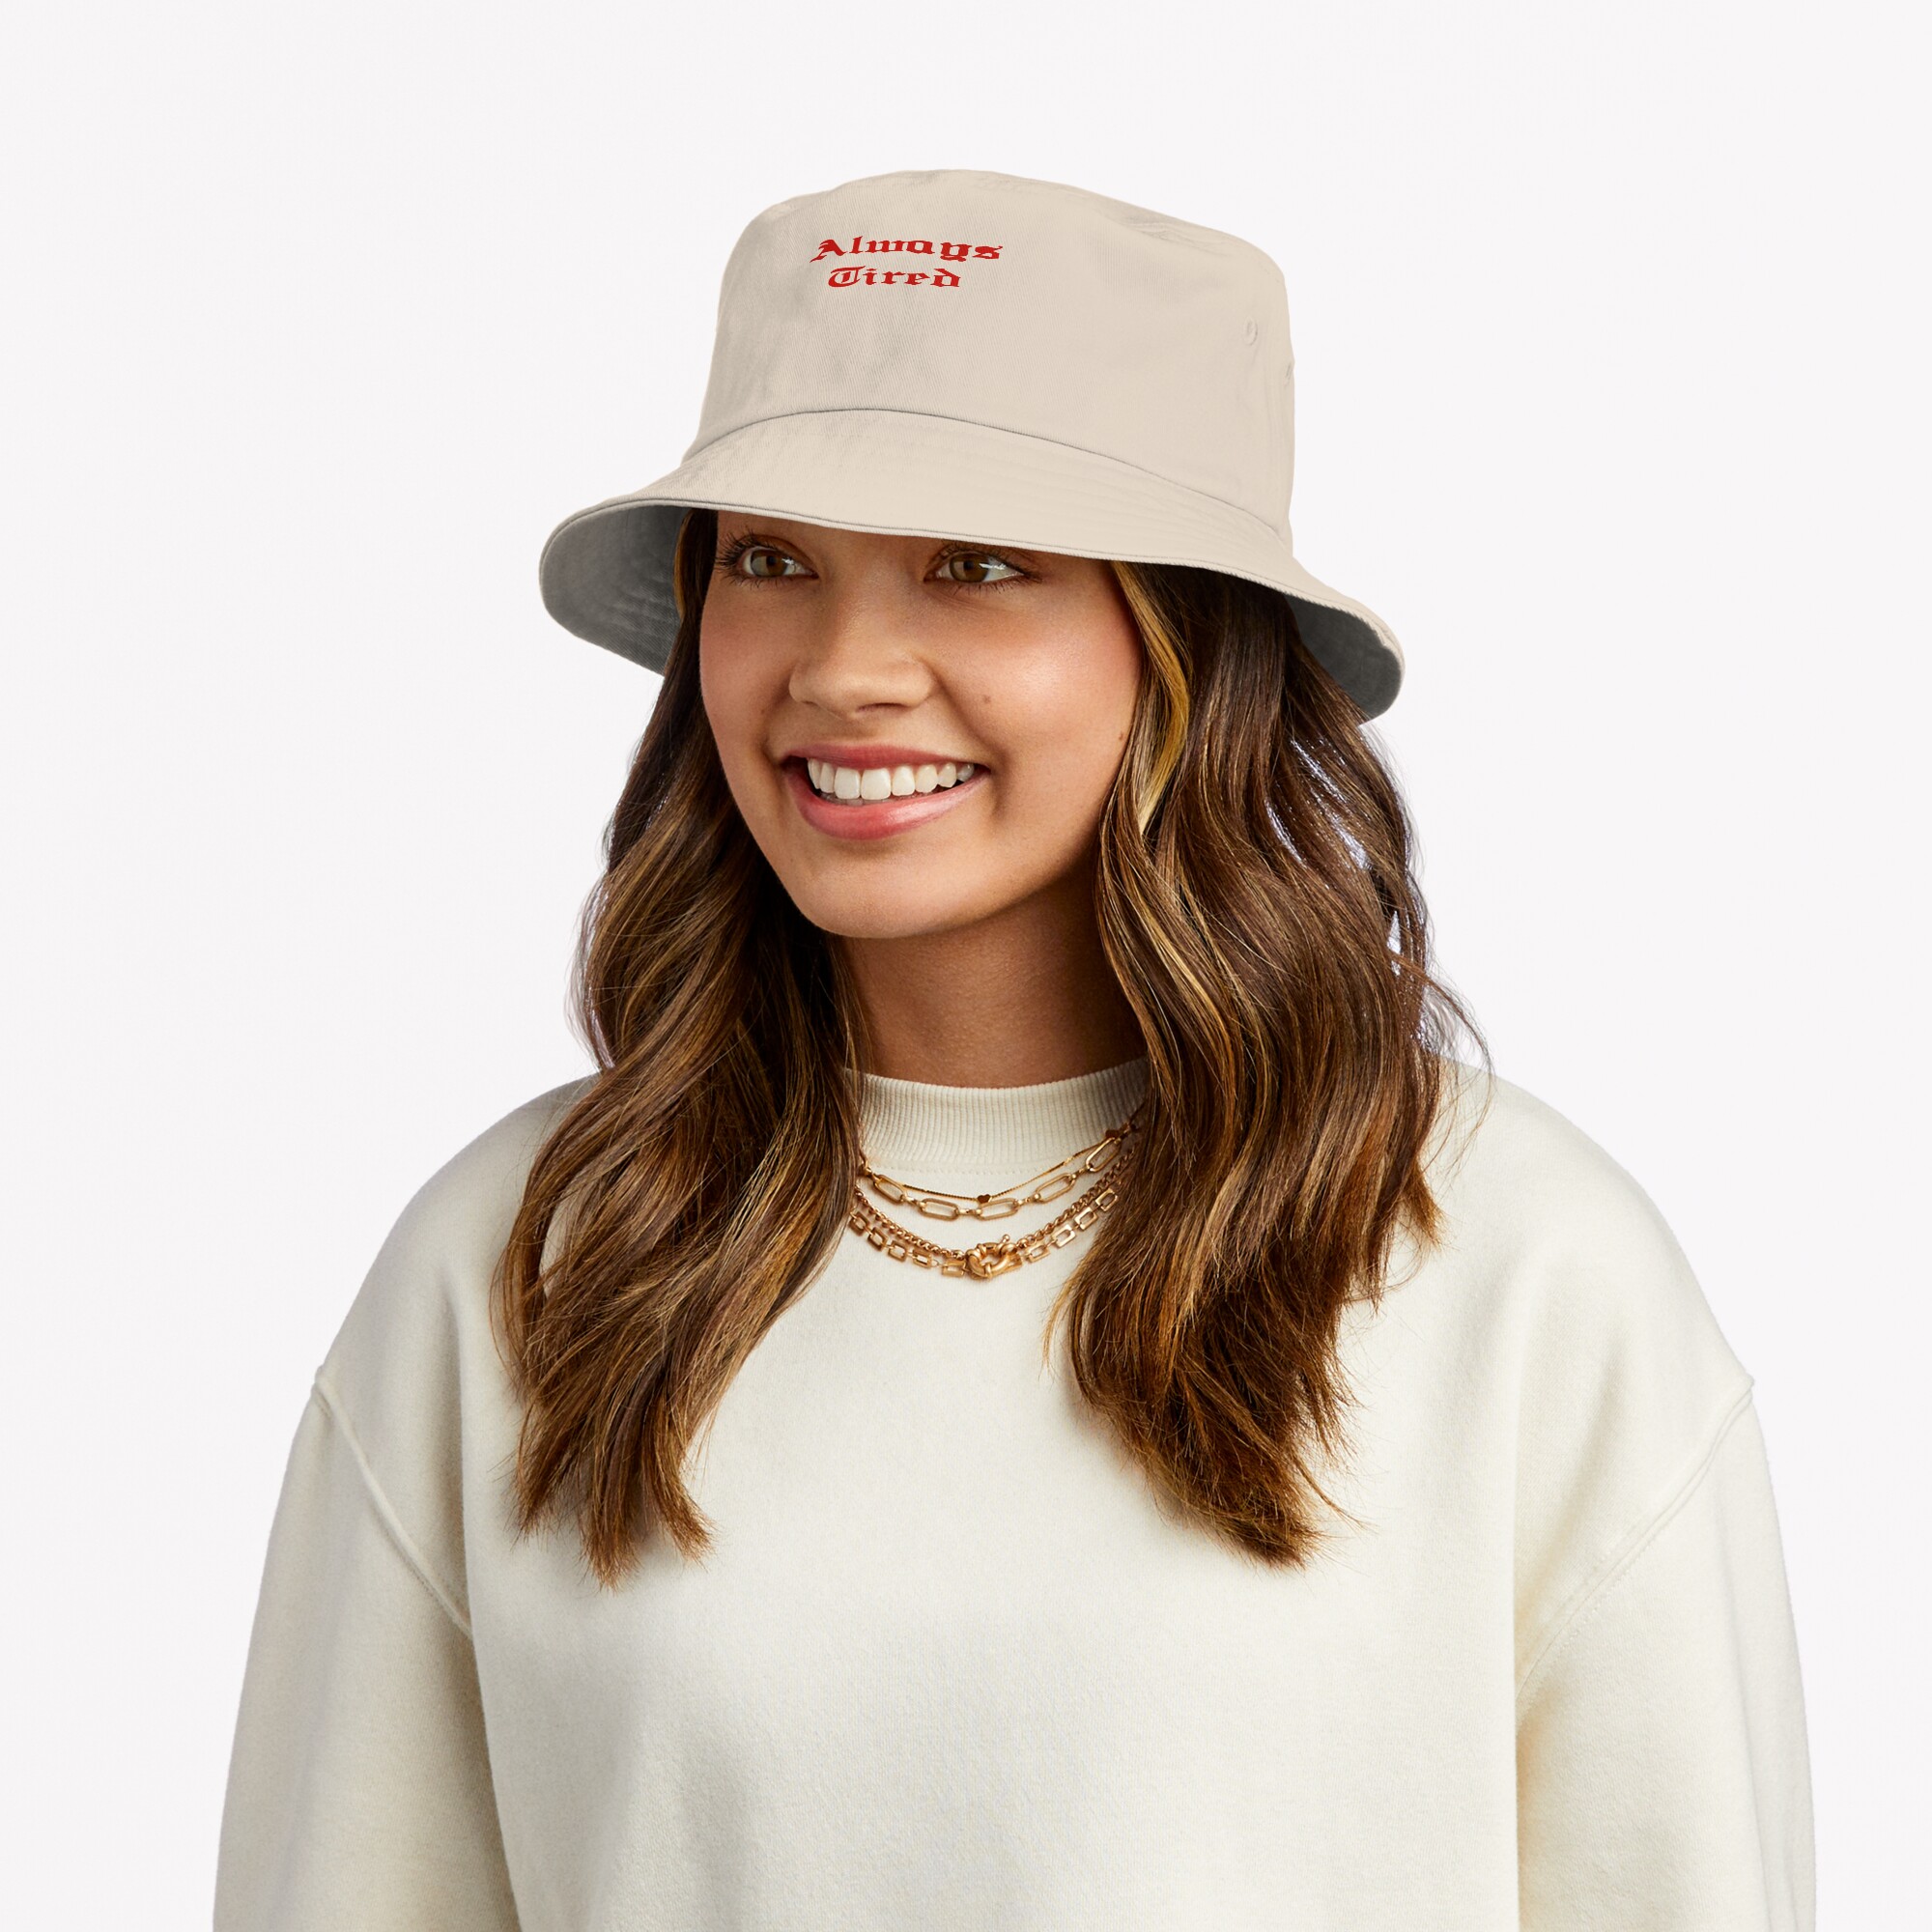 ssrcobucket hatwomense5d6c5f62bbf65eefrontsquare2000x2000 bgf8f8f8 4 - Sam And Colby Shop